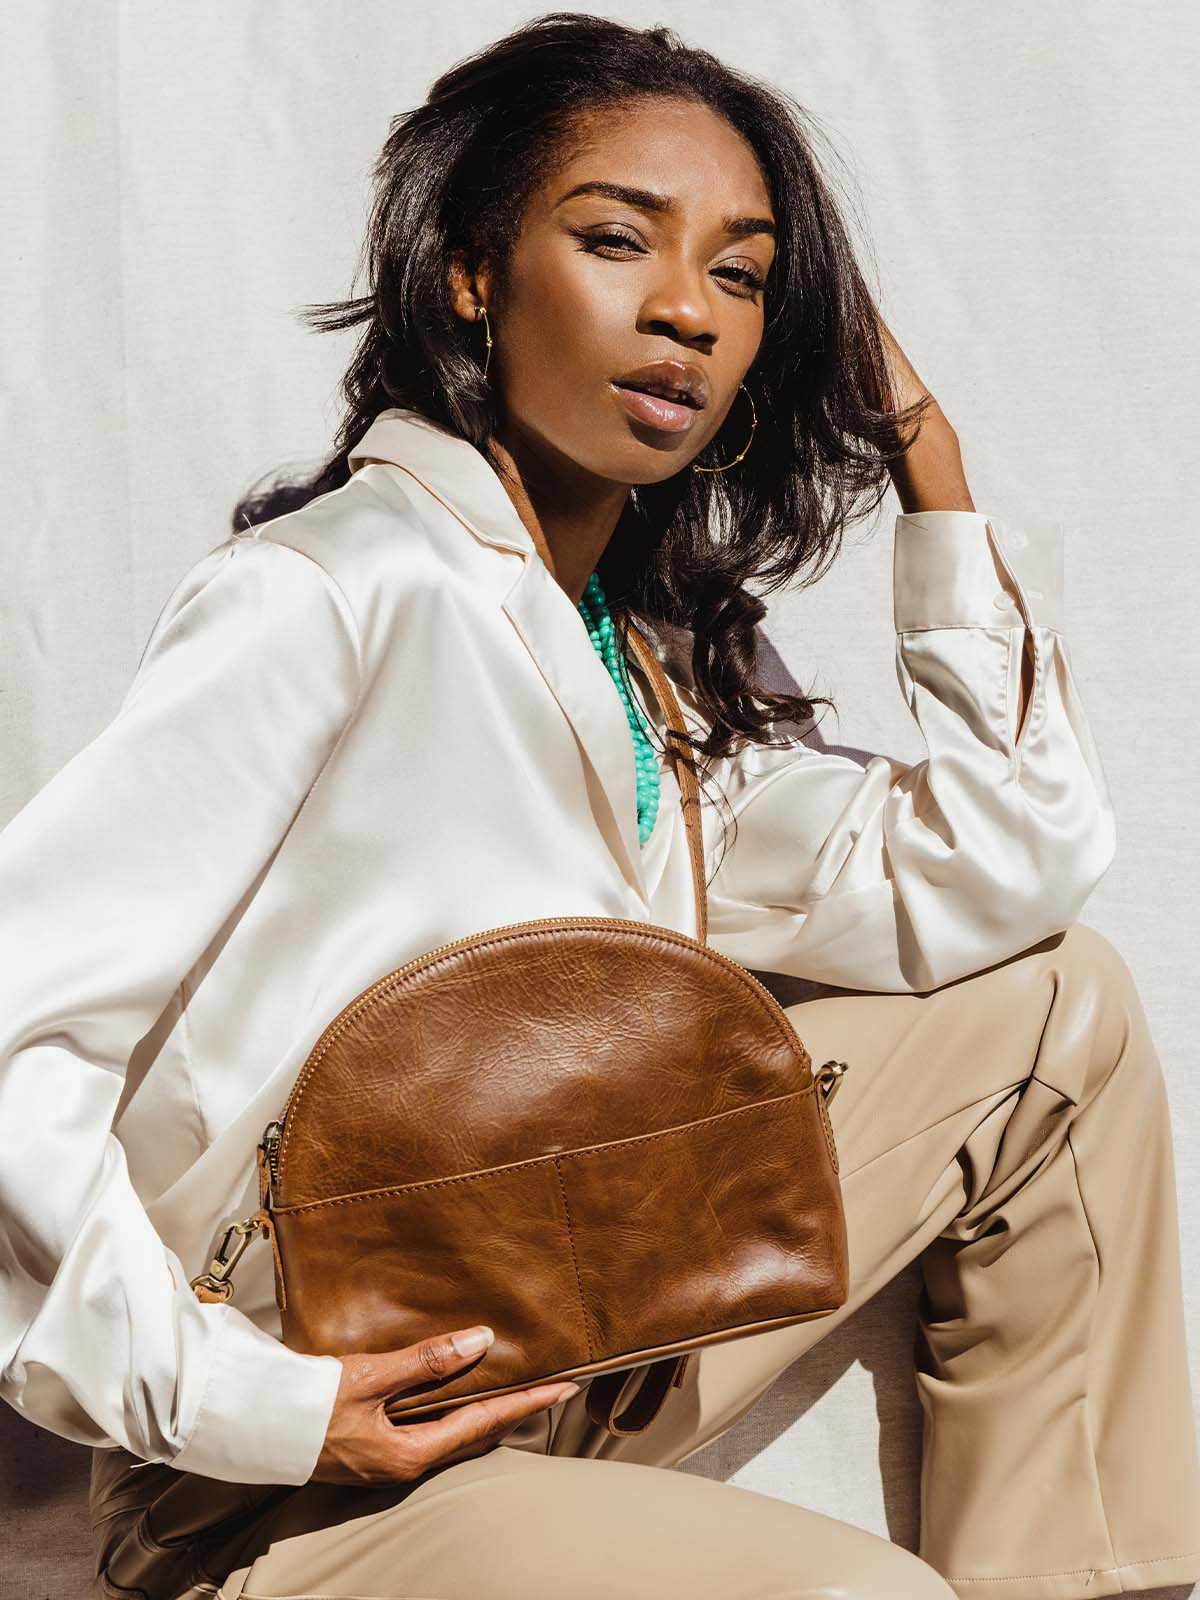 Female model holding brown leather half moon hang bag. Wearing a white silk top and tan leather pants.